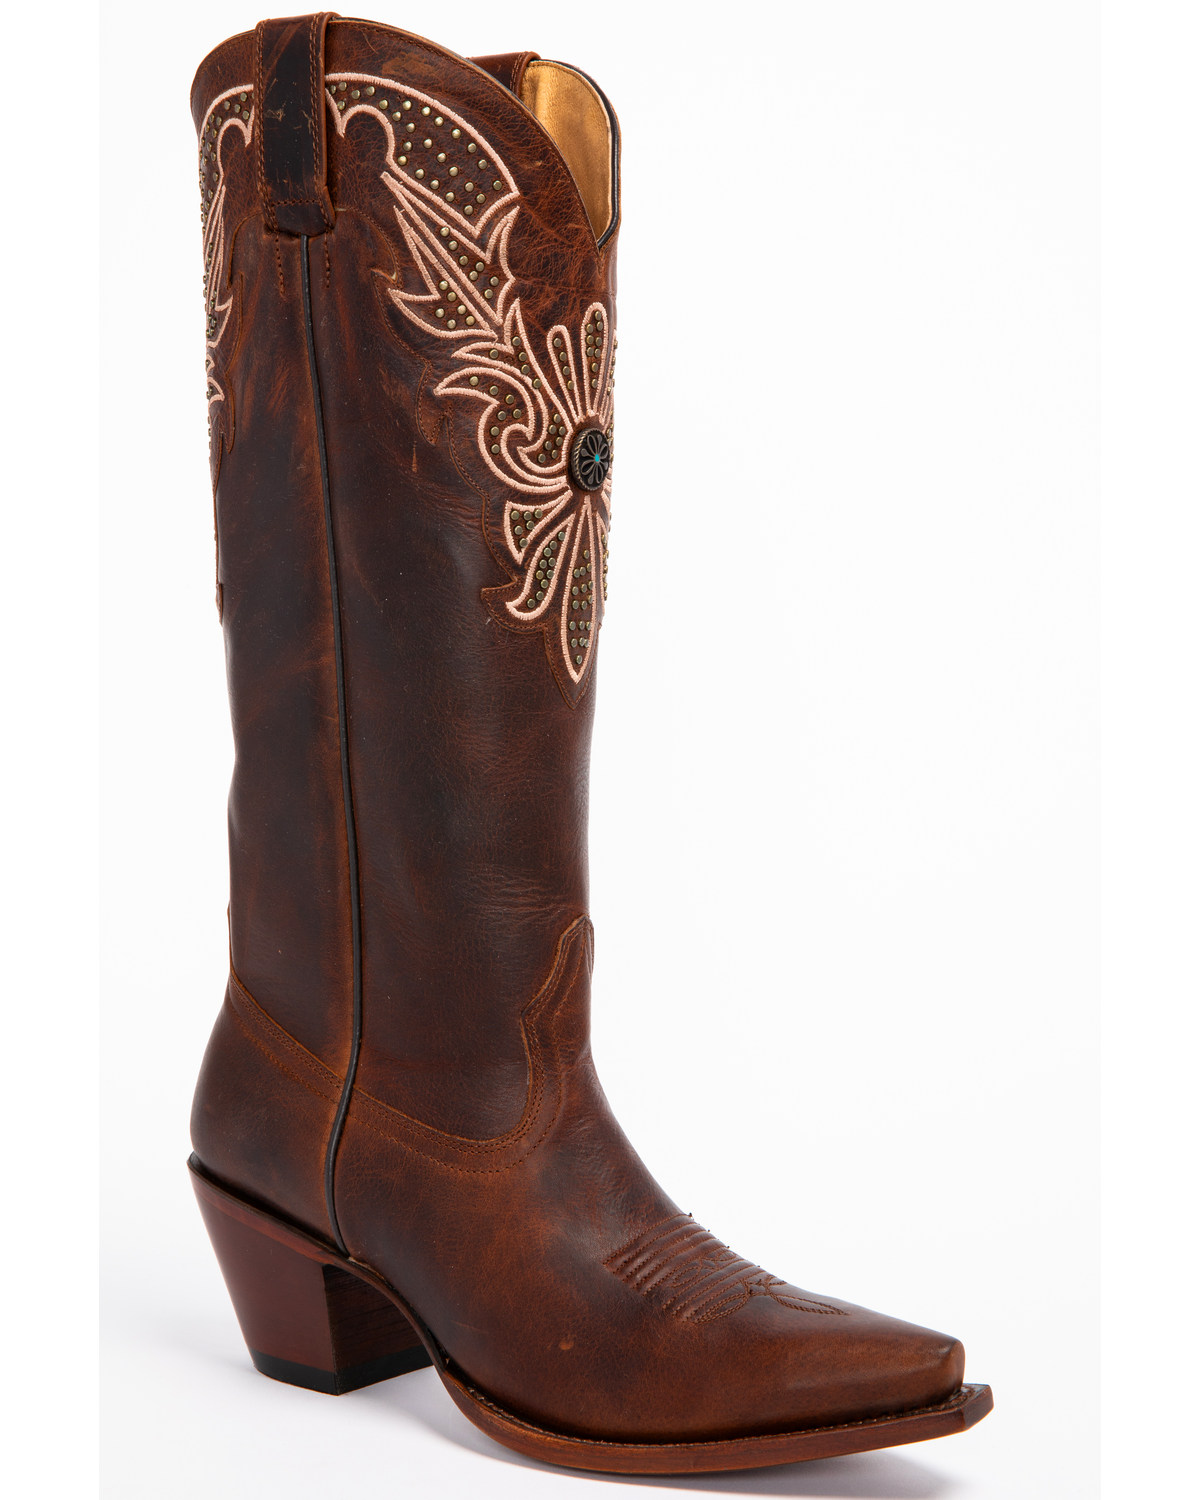 Shyanne Women's Mariel Floral Embroidered Studded Concho Western Boots - Snip Toe